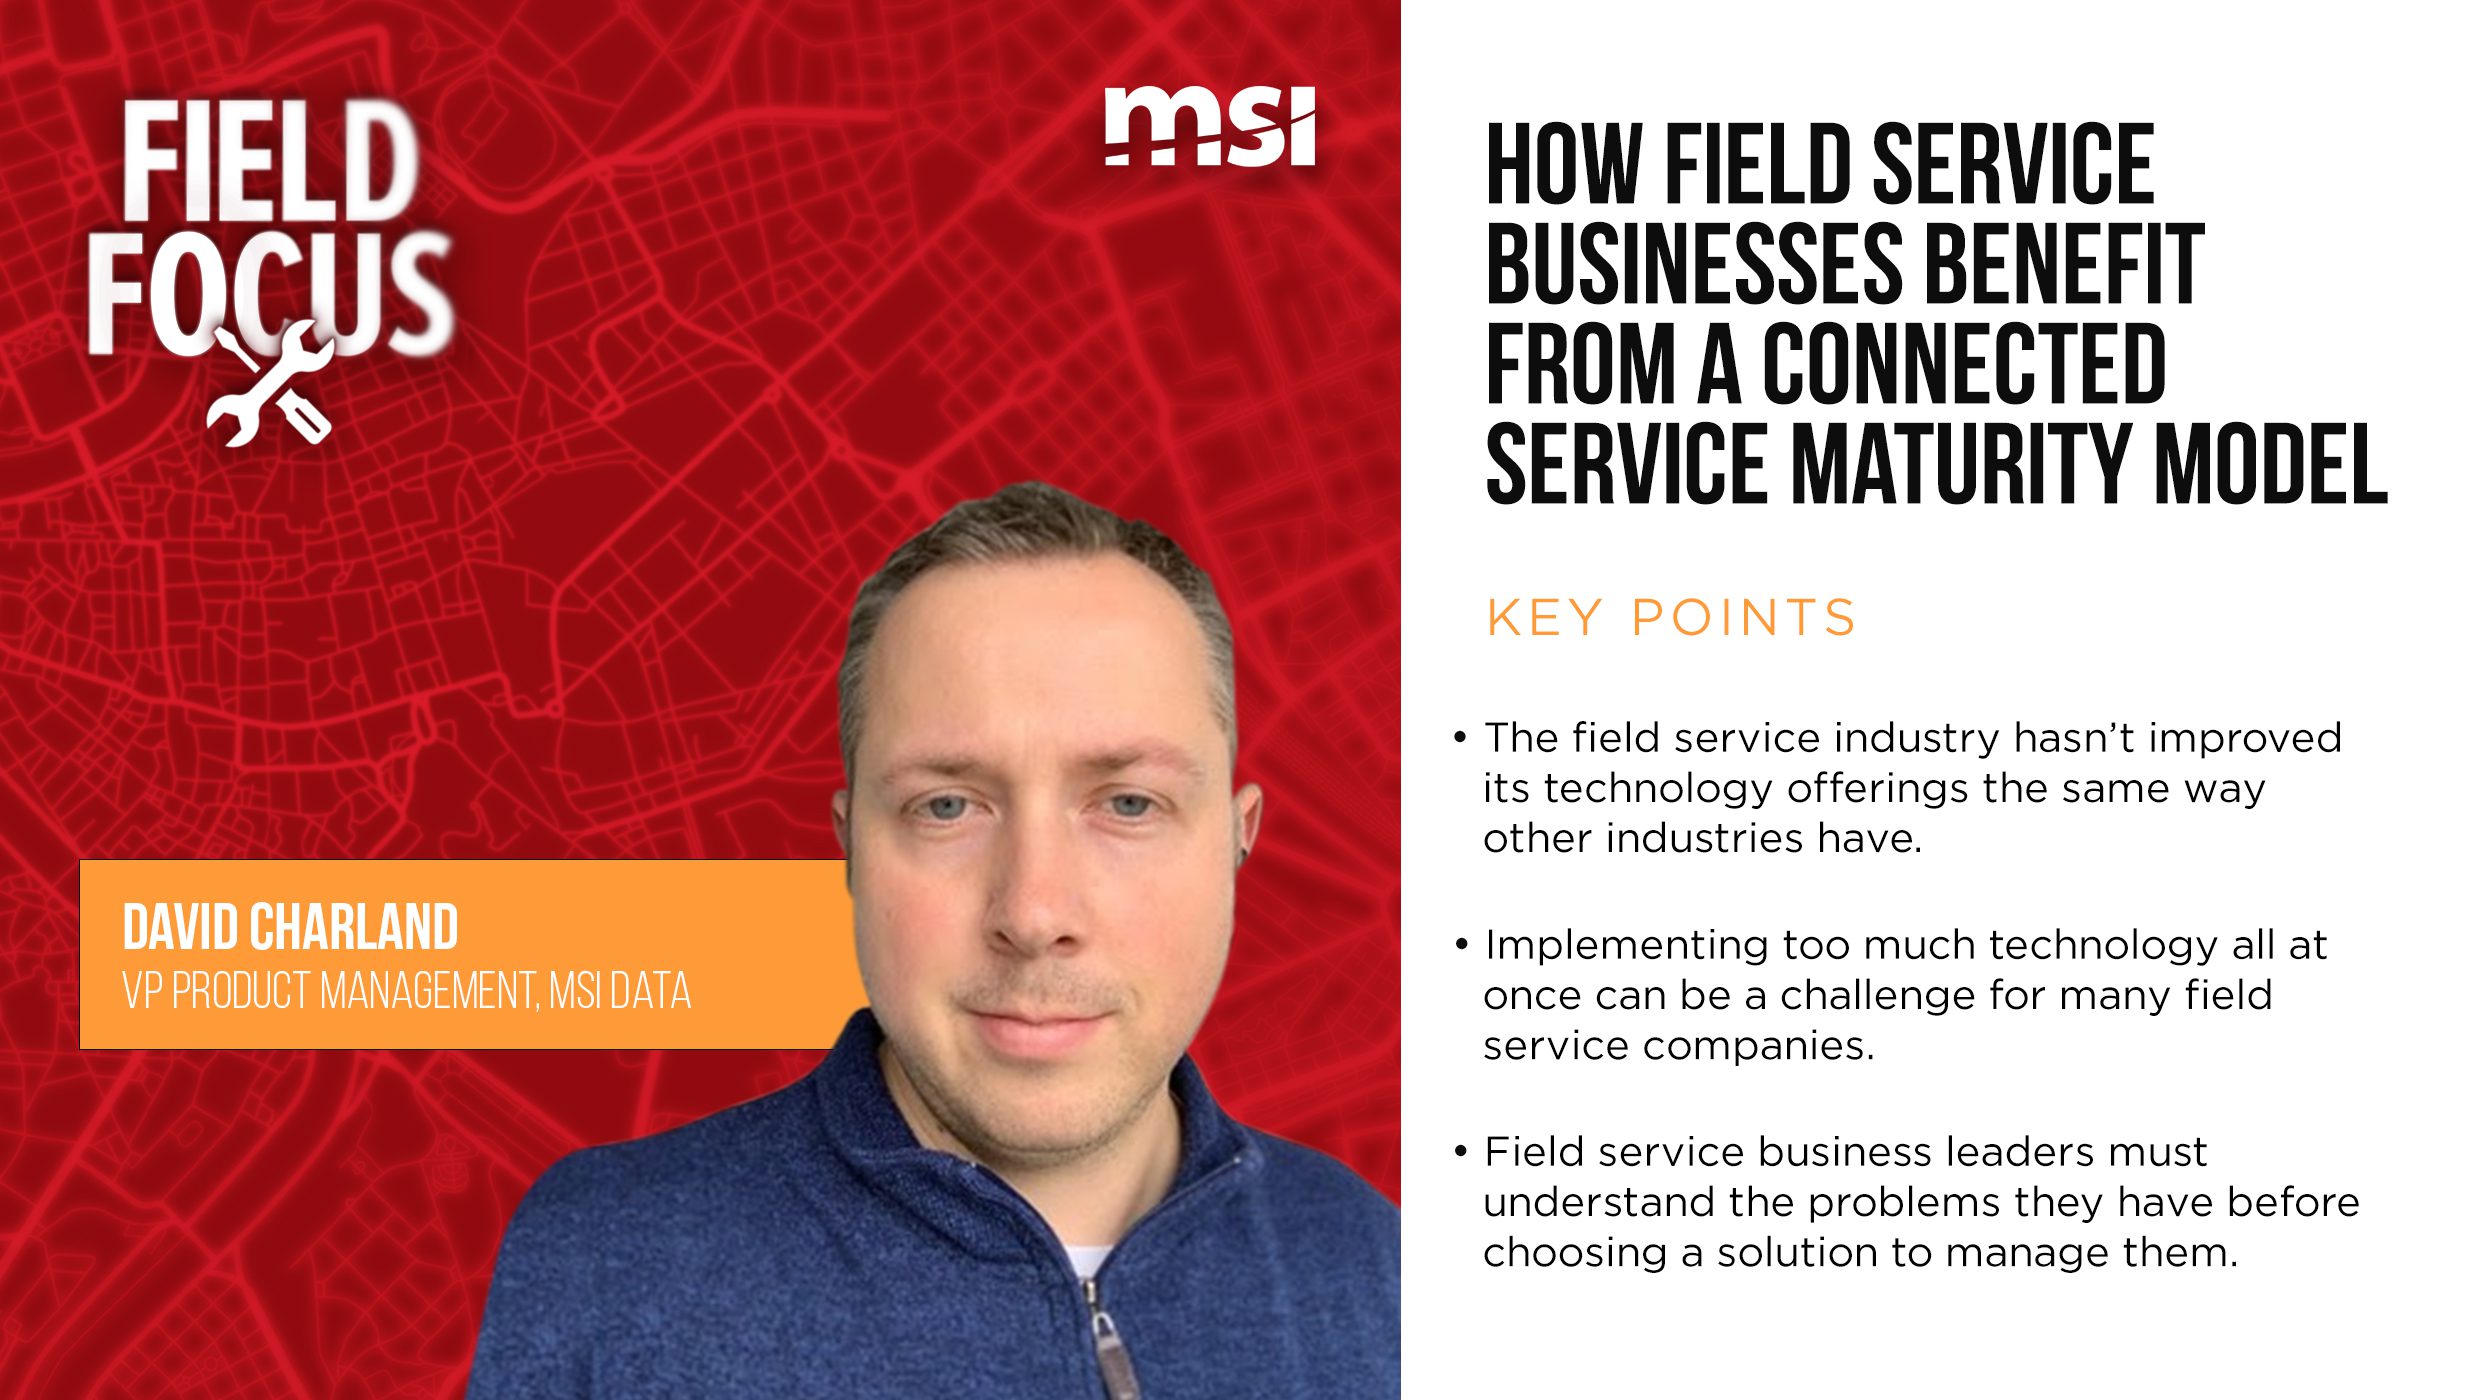 MSI Field Focus podcast: how field service businesses benefit from a connected service maturity model